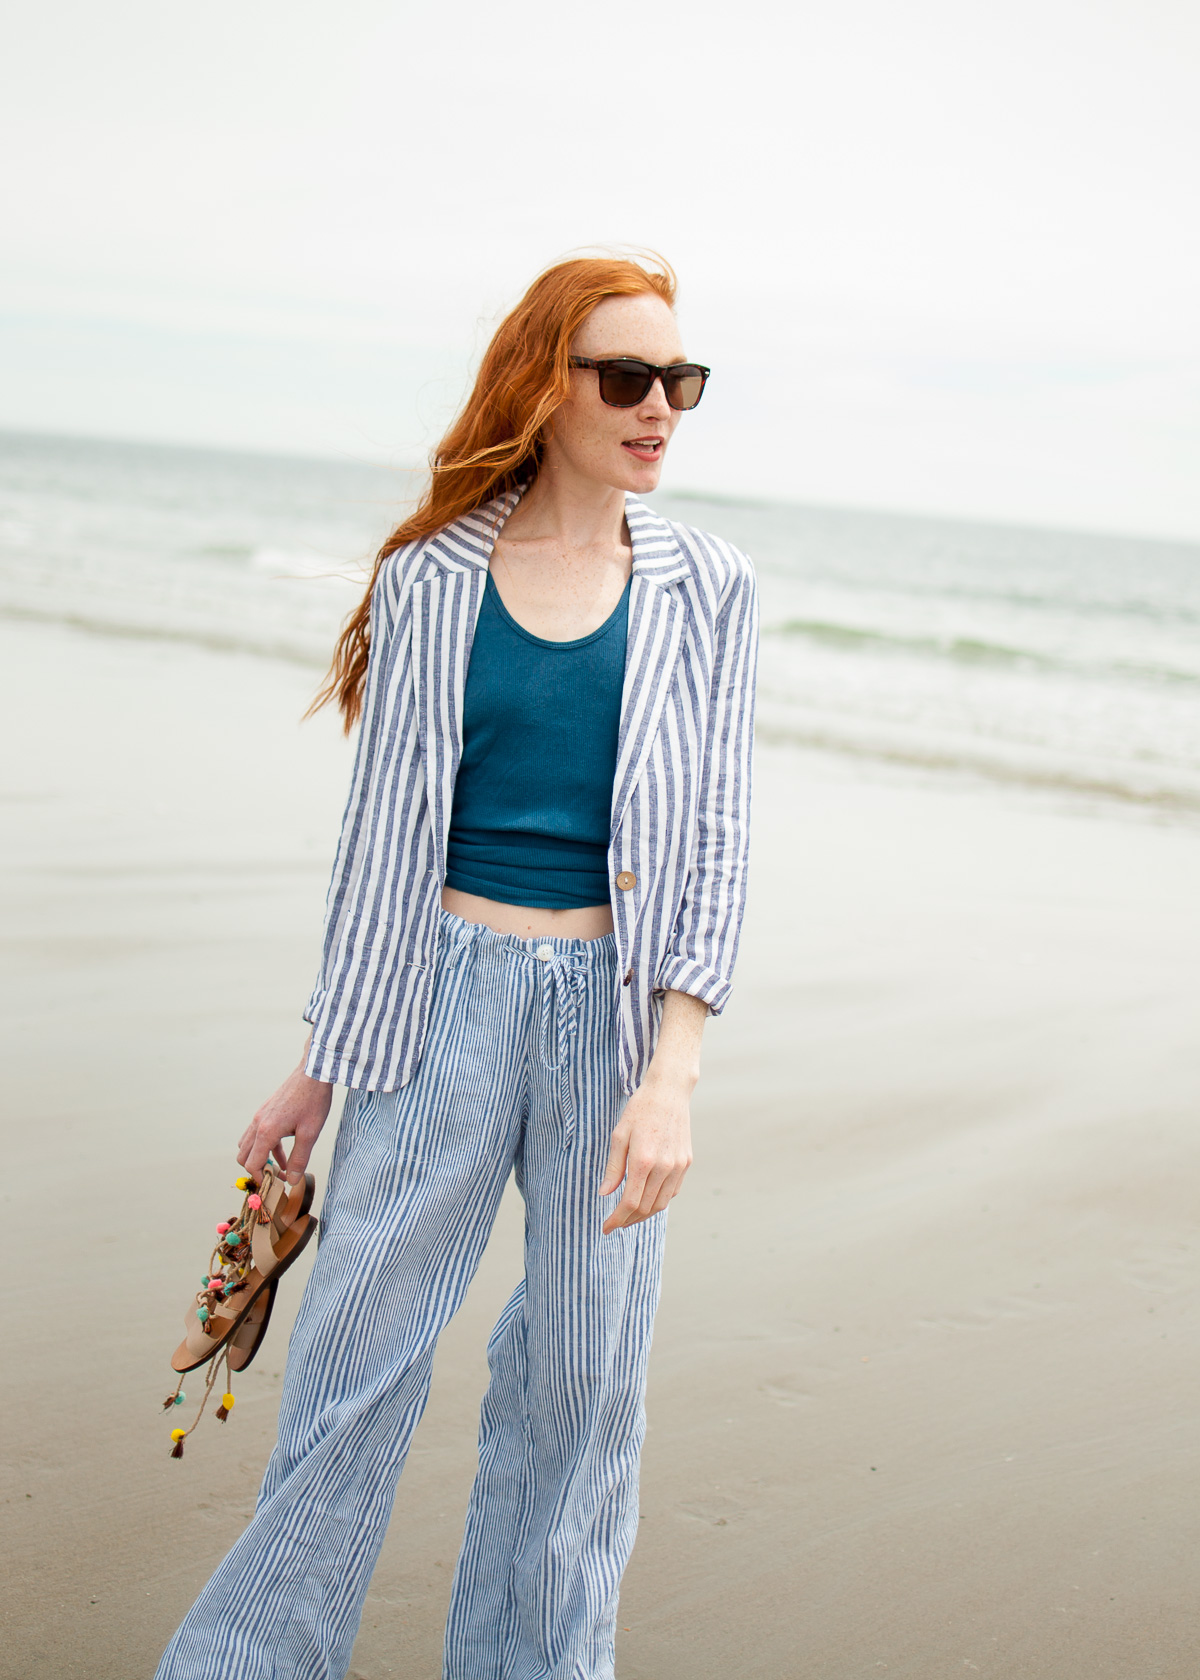 wearing effortless linen pieces summer style on the beach 